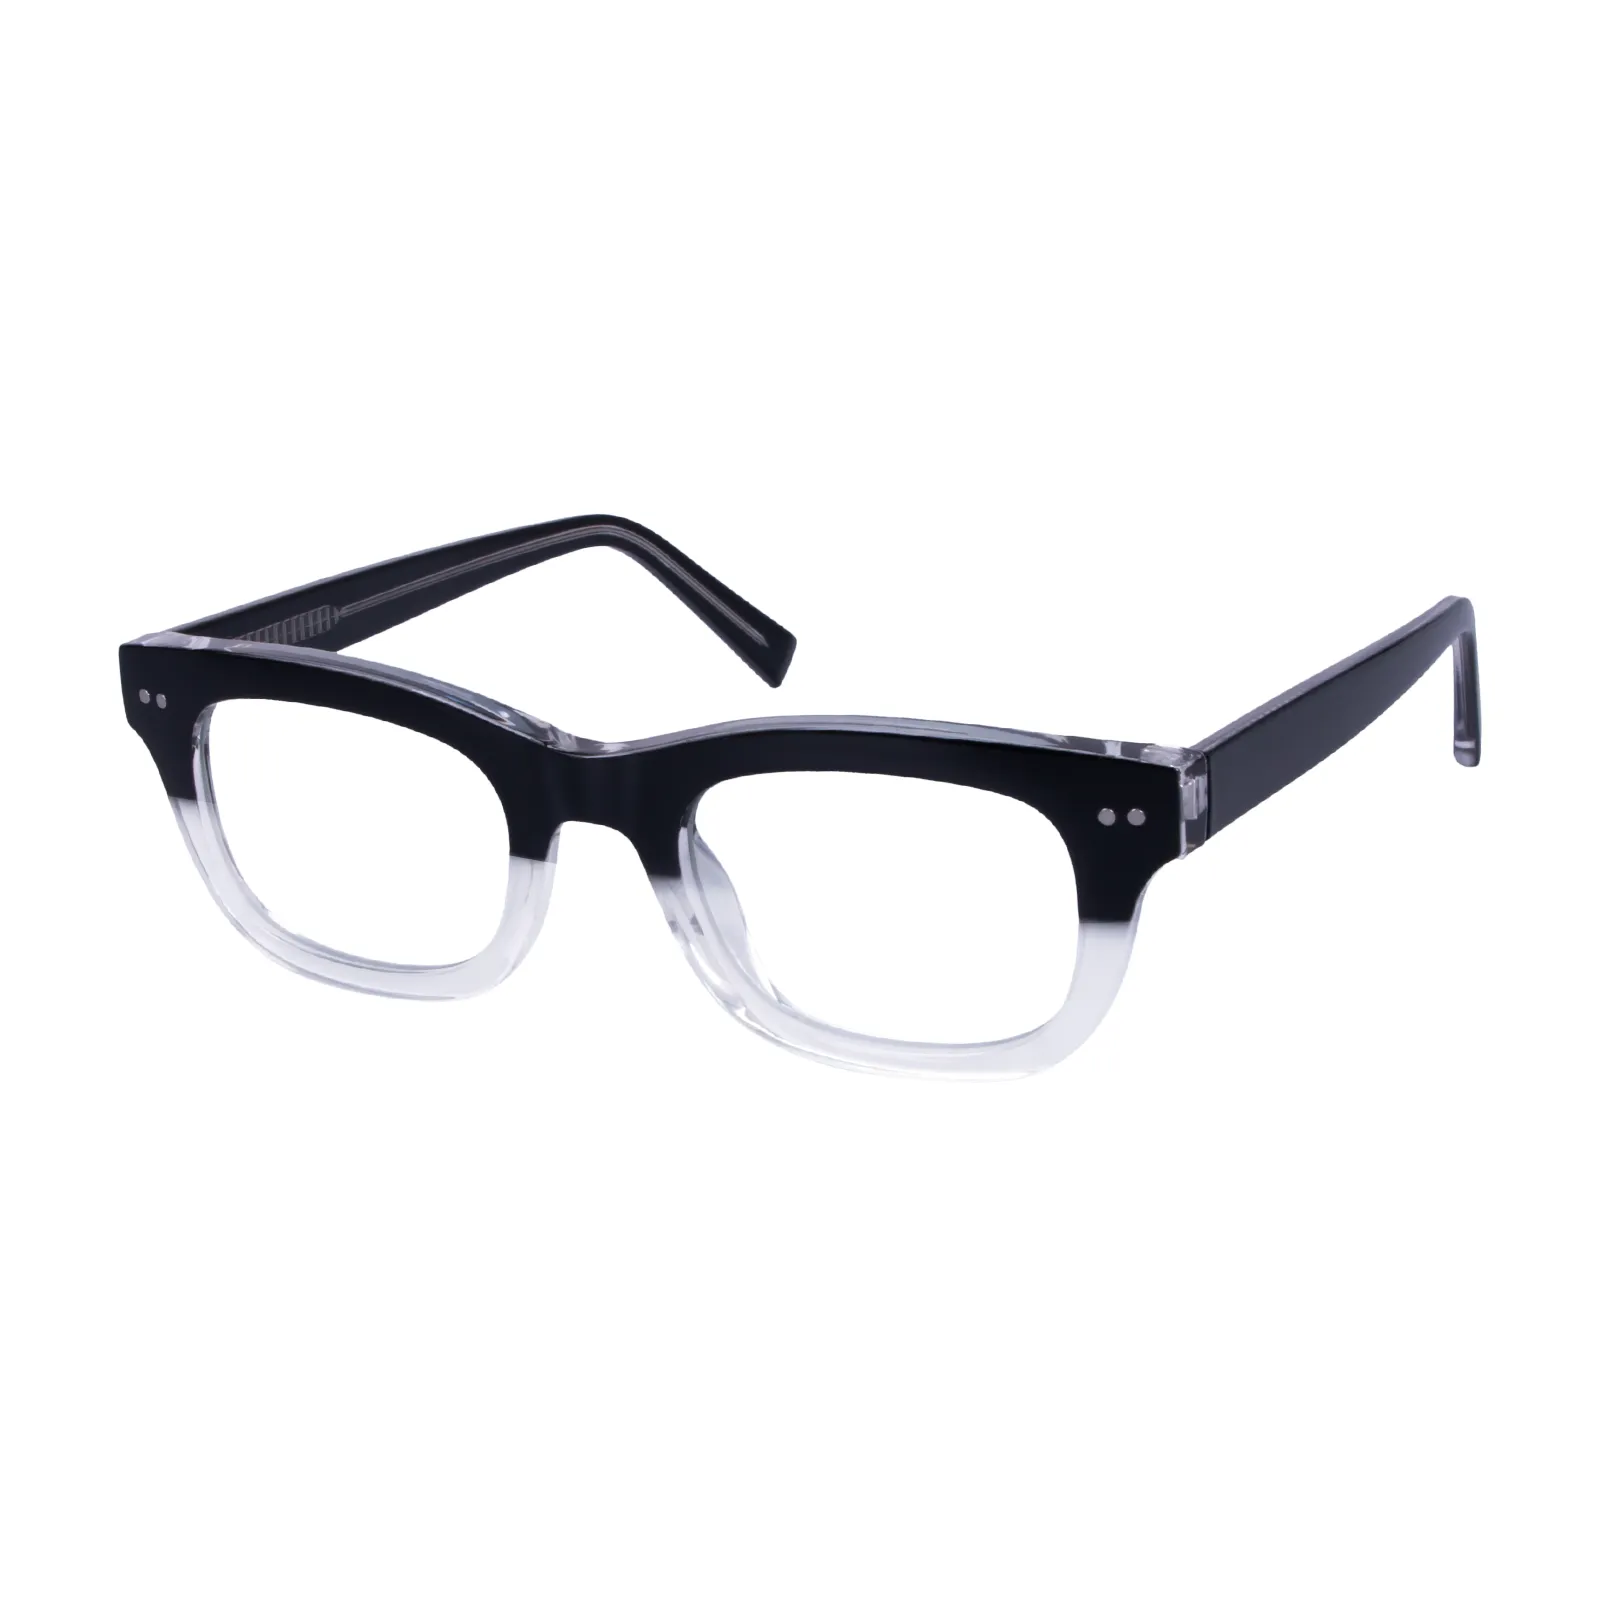 Theresia - Square Black Glasses for Women